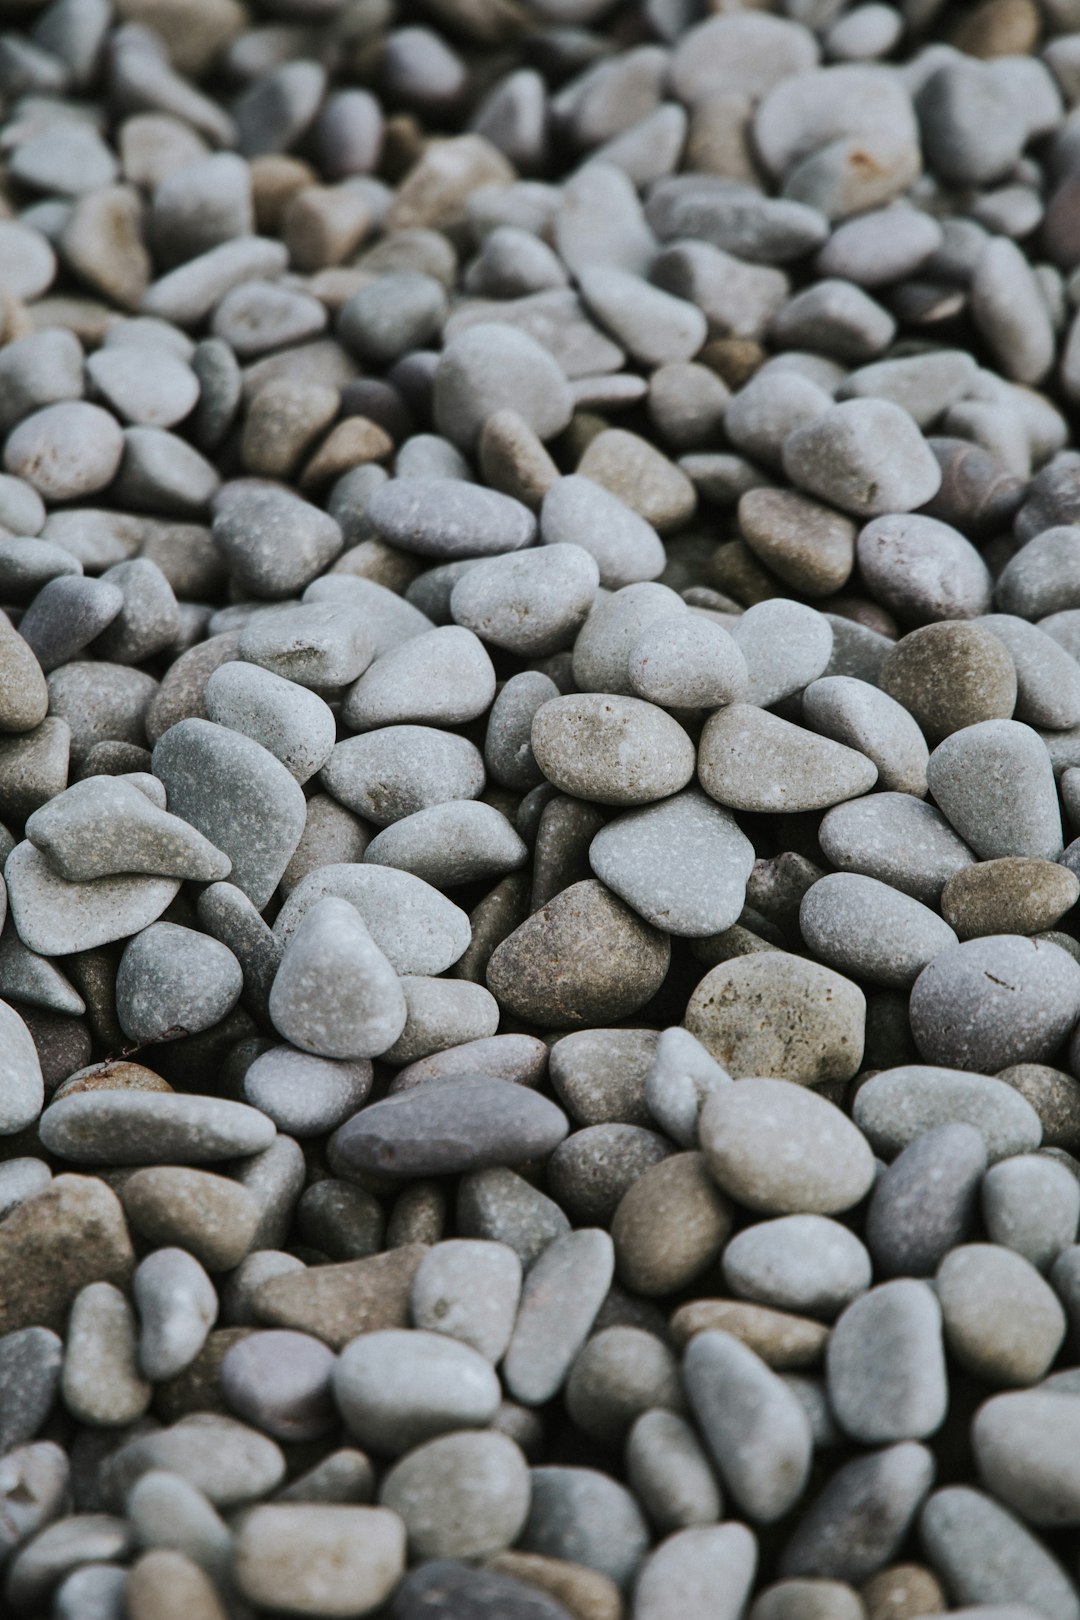 gray and black pebbles during daytime